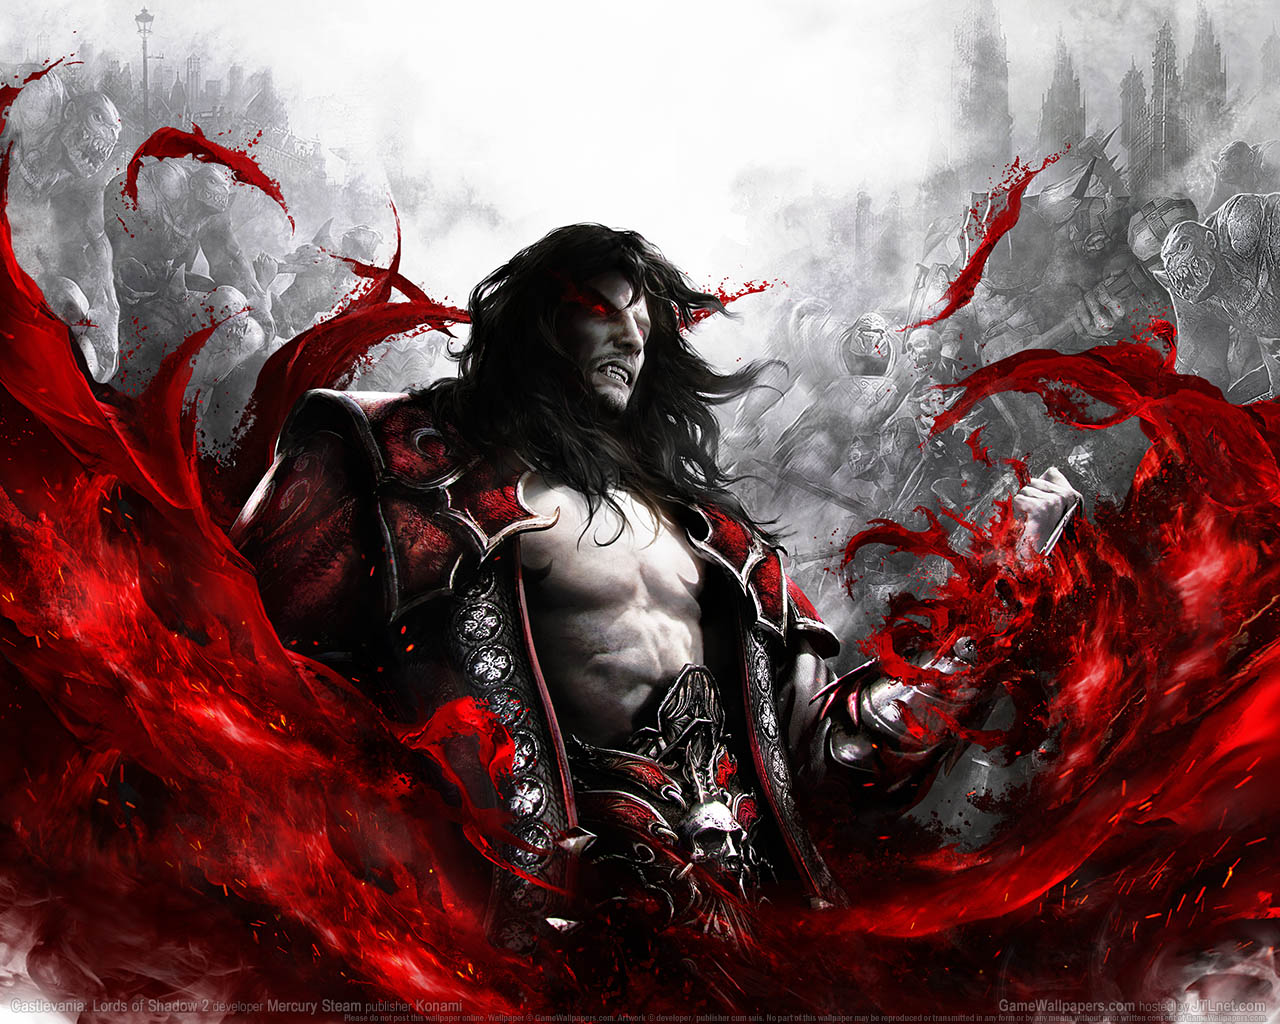 Castlevania%253A Lords of Shadow 2 achtergrond 03 1280x1024